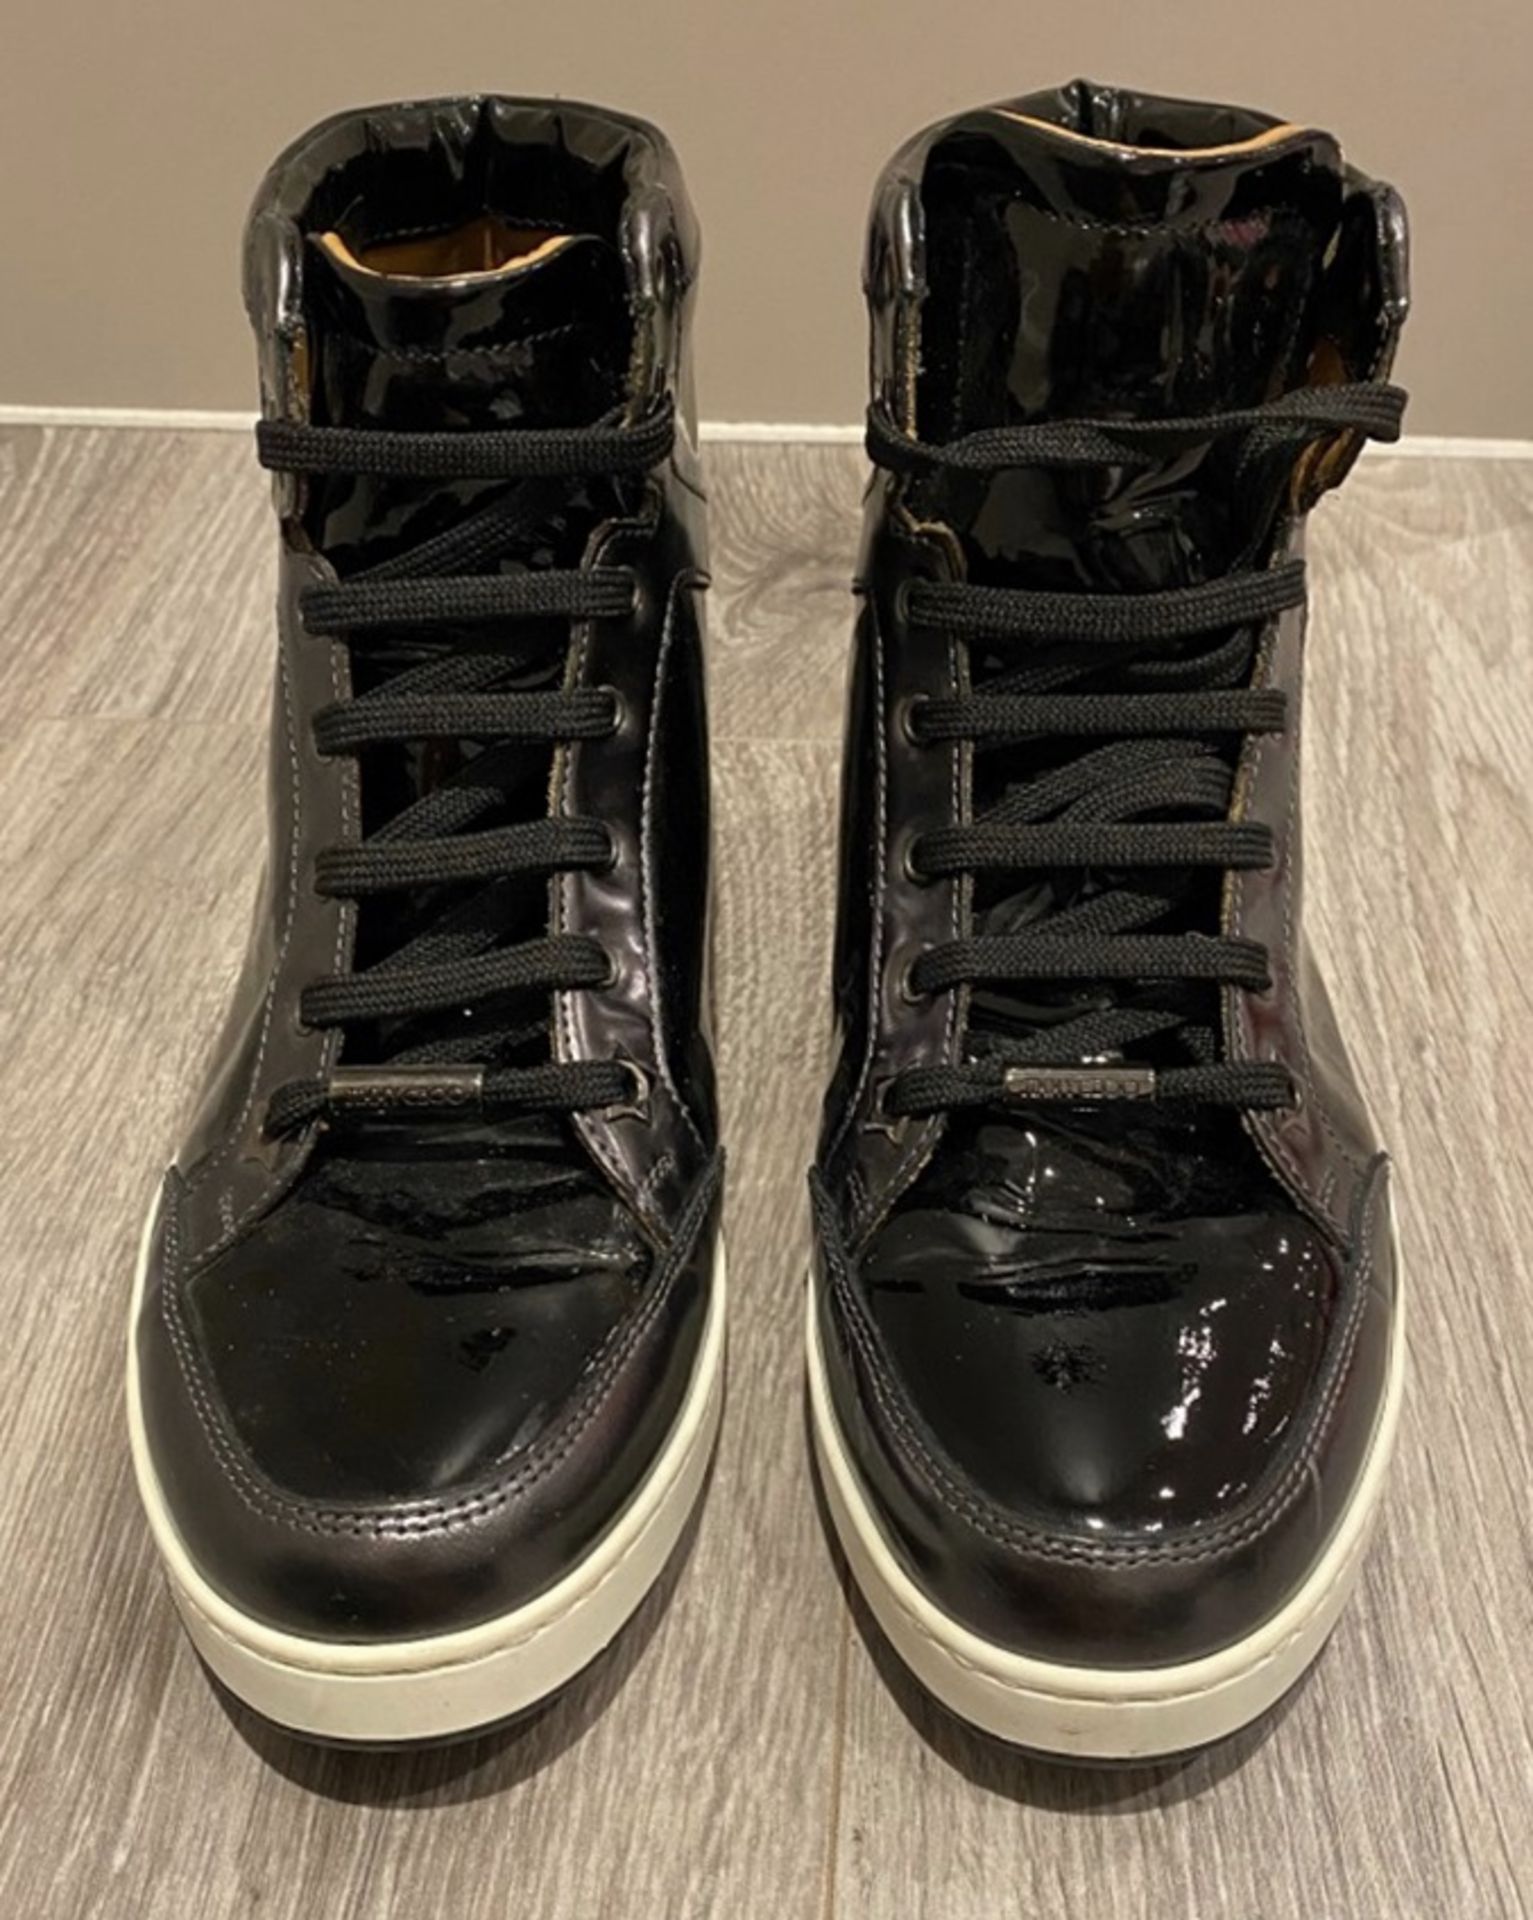 1 x Pair Of Genuine Jimmy Choo Sneakers In Black Patent - Size: 36 - Preowned in Very Good Condition - Image 6 of 6